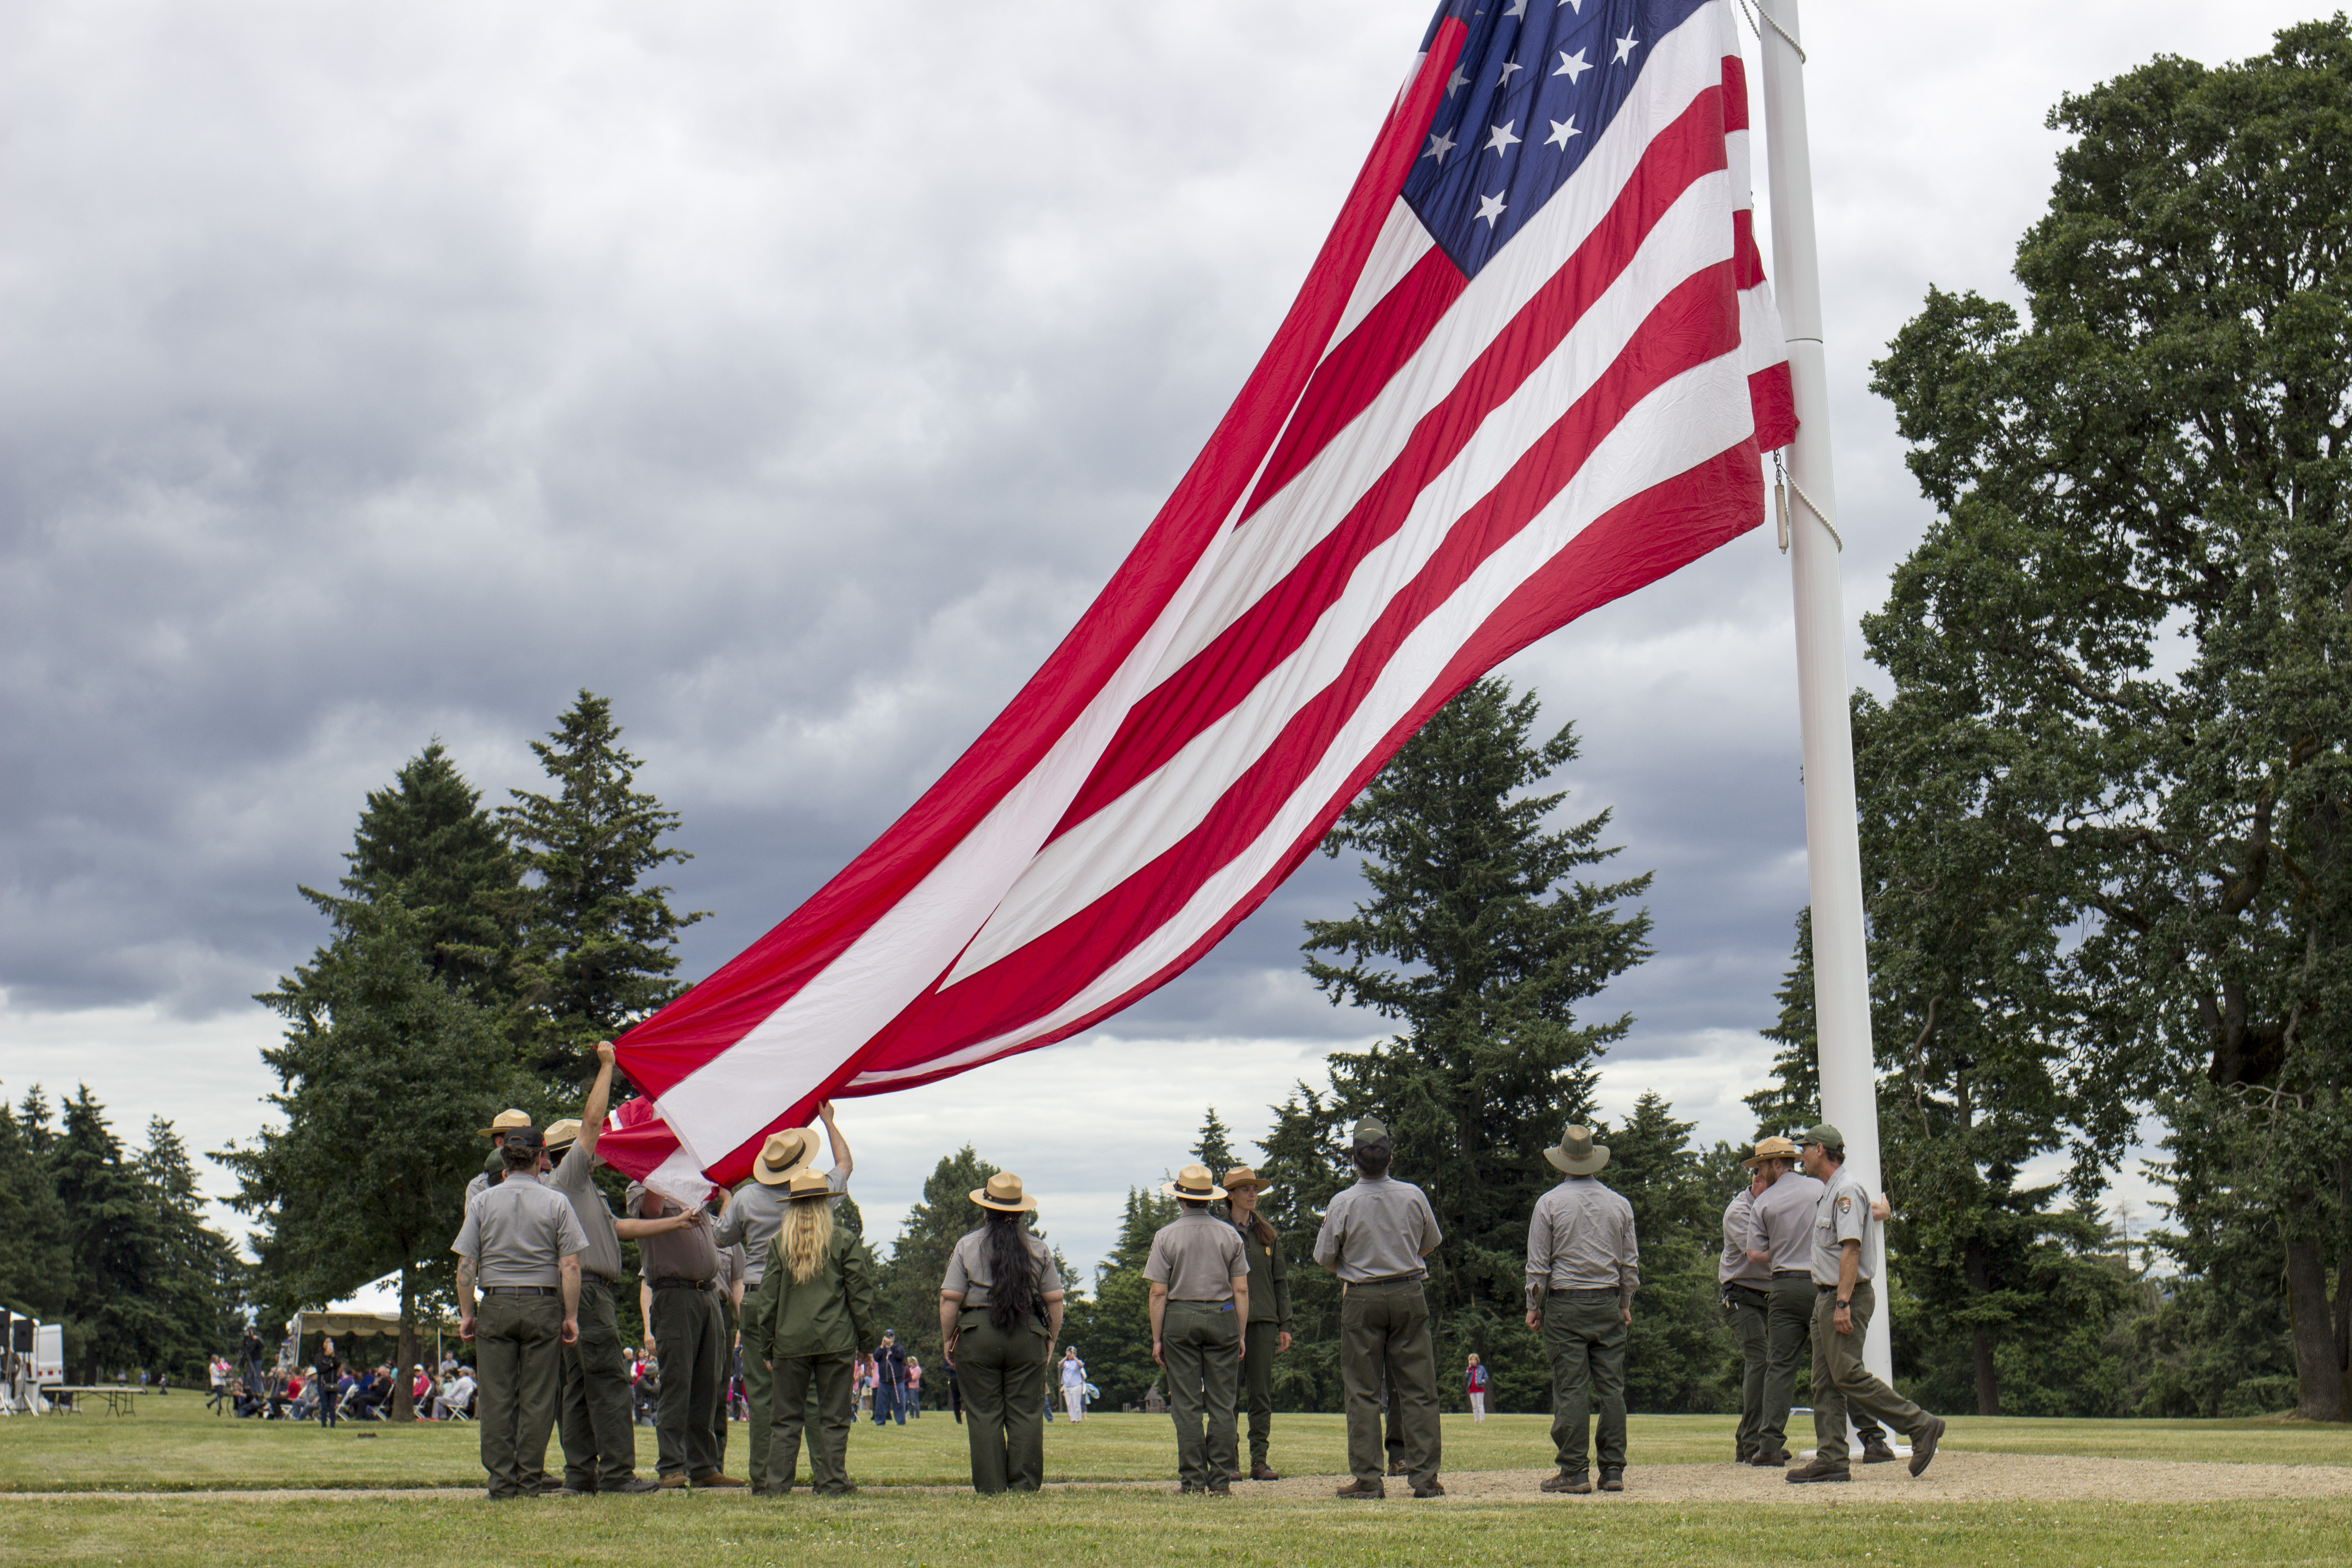 Large flag takes up 3/4 of photo. It is tethered to a pole on the right, and swoops downward to left. Park Rangers hold the bottom of the flag.